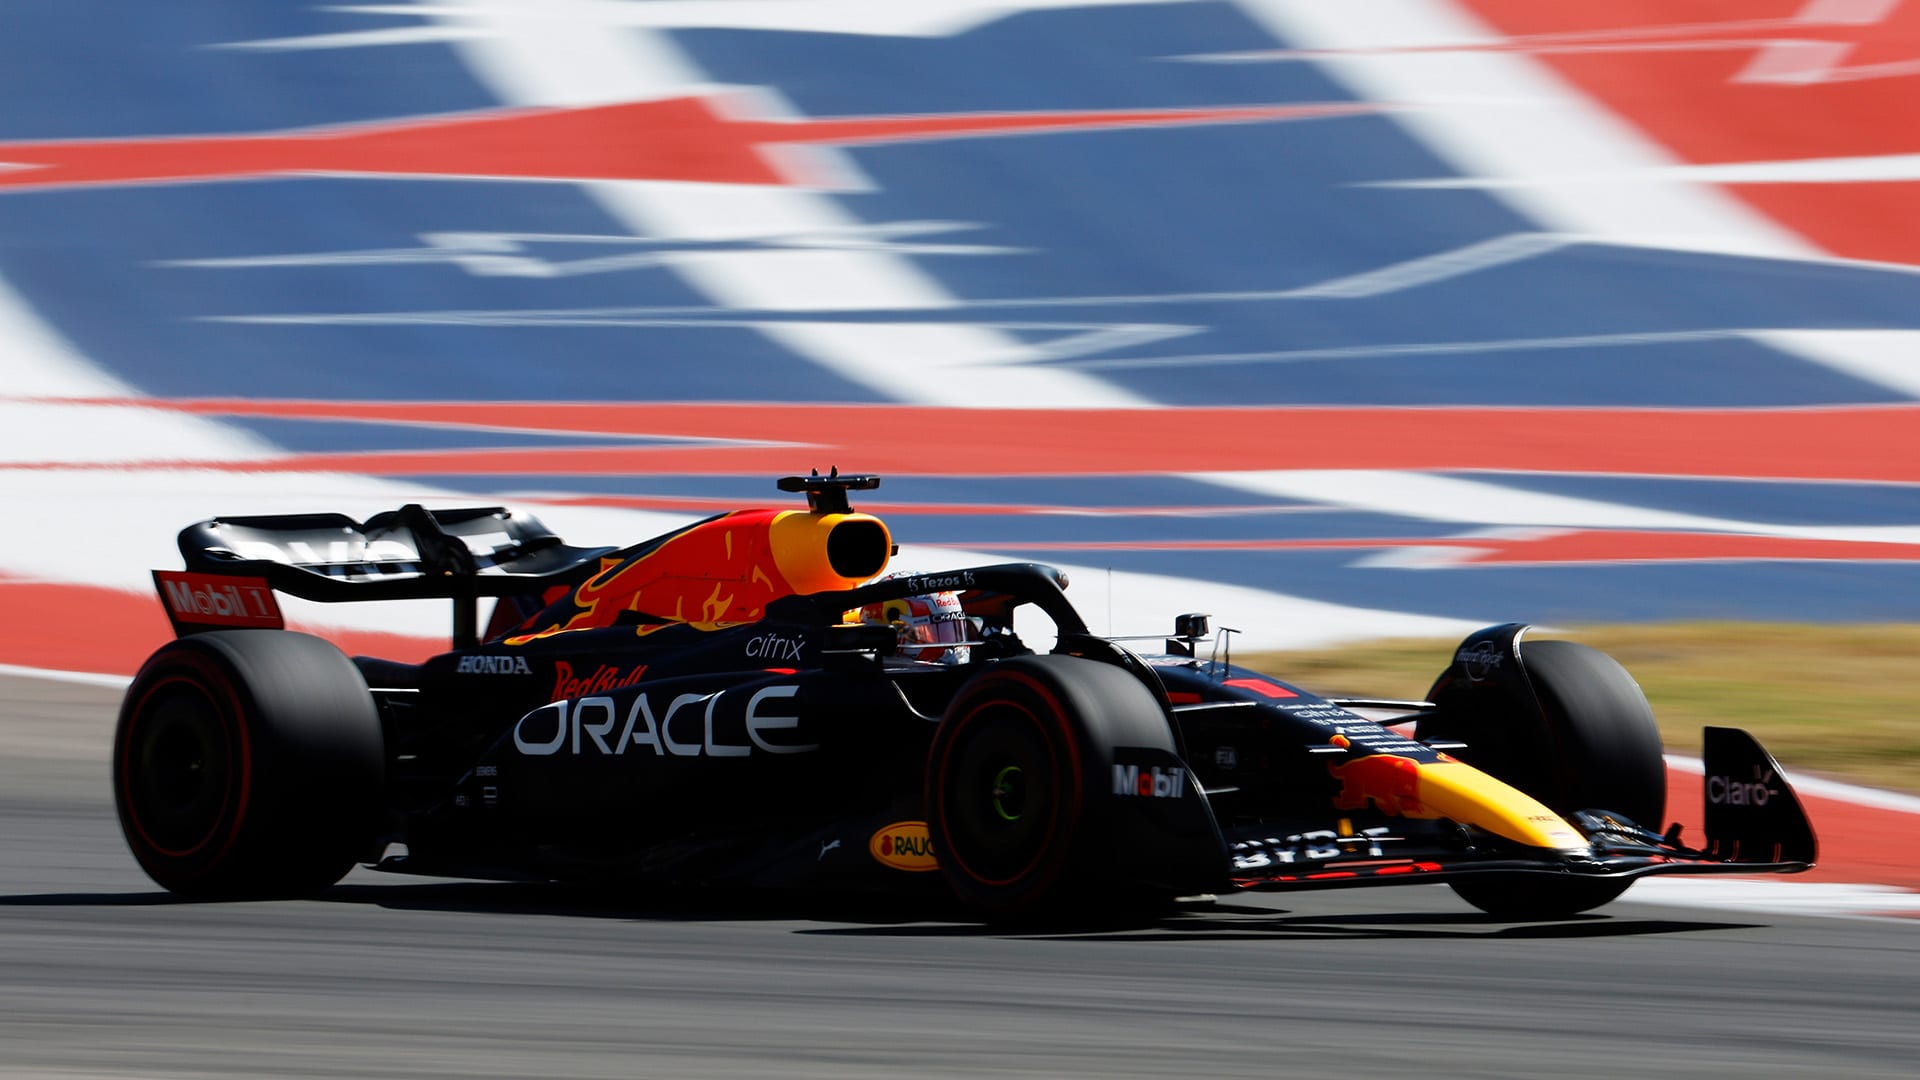 2022 United States Grand Prix FP3 report and highlights Verstappen leads Leclerc and Sainz in final Austin practice session Formula 1®